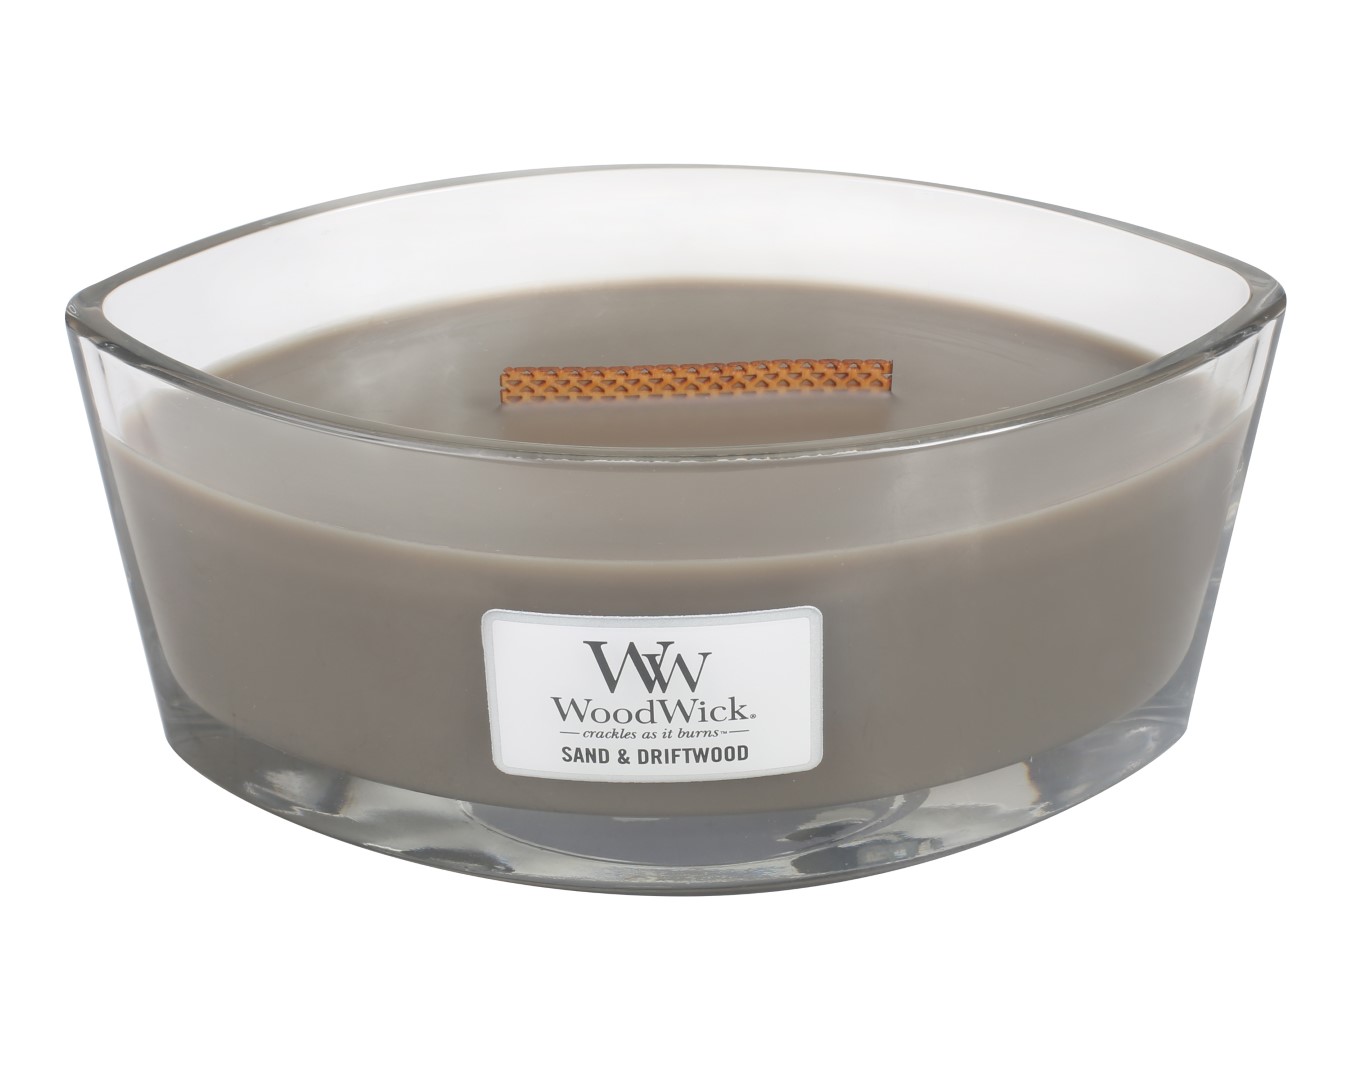 https://www.warentuin.nl/media/catalog/product/S/C/SCAN5038581056944_2_woodwick_home_fragrance_sand___driftwood_ellipse_candlewood_68ac.jpg